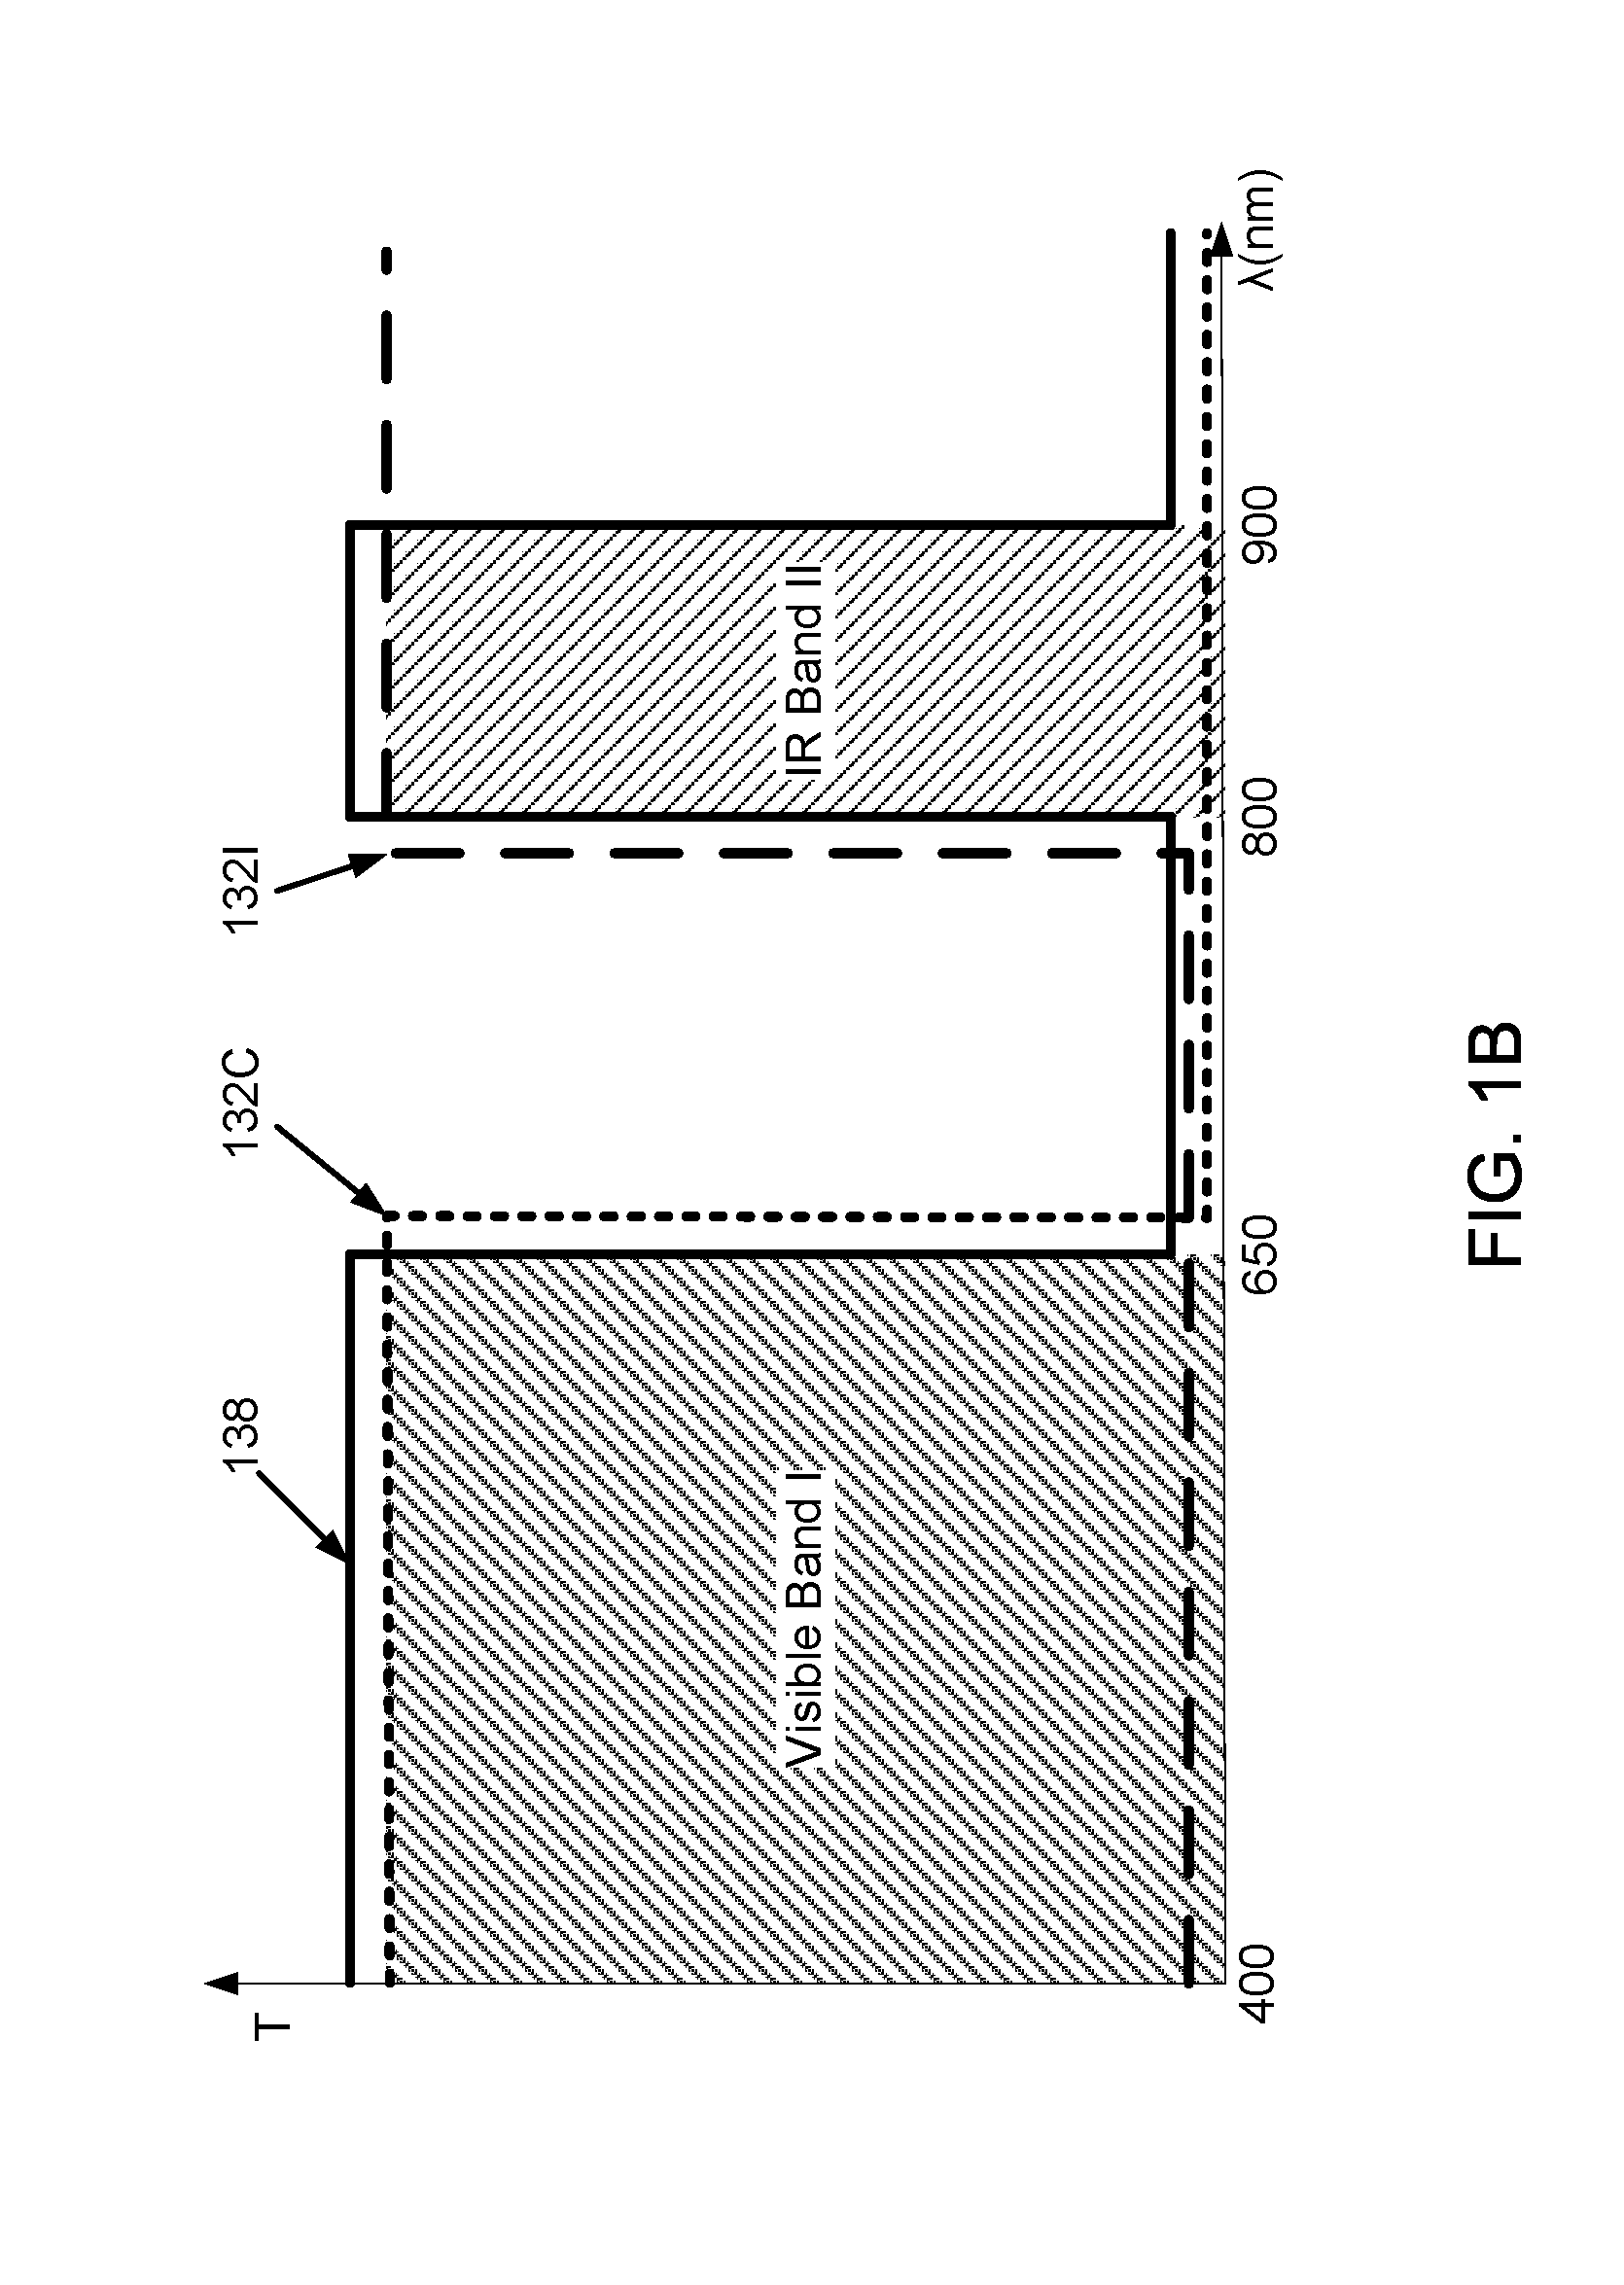 Sensor assembly with selective infrared filter array